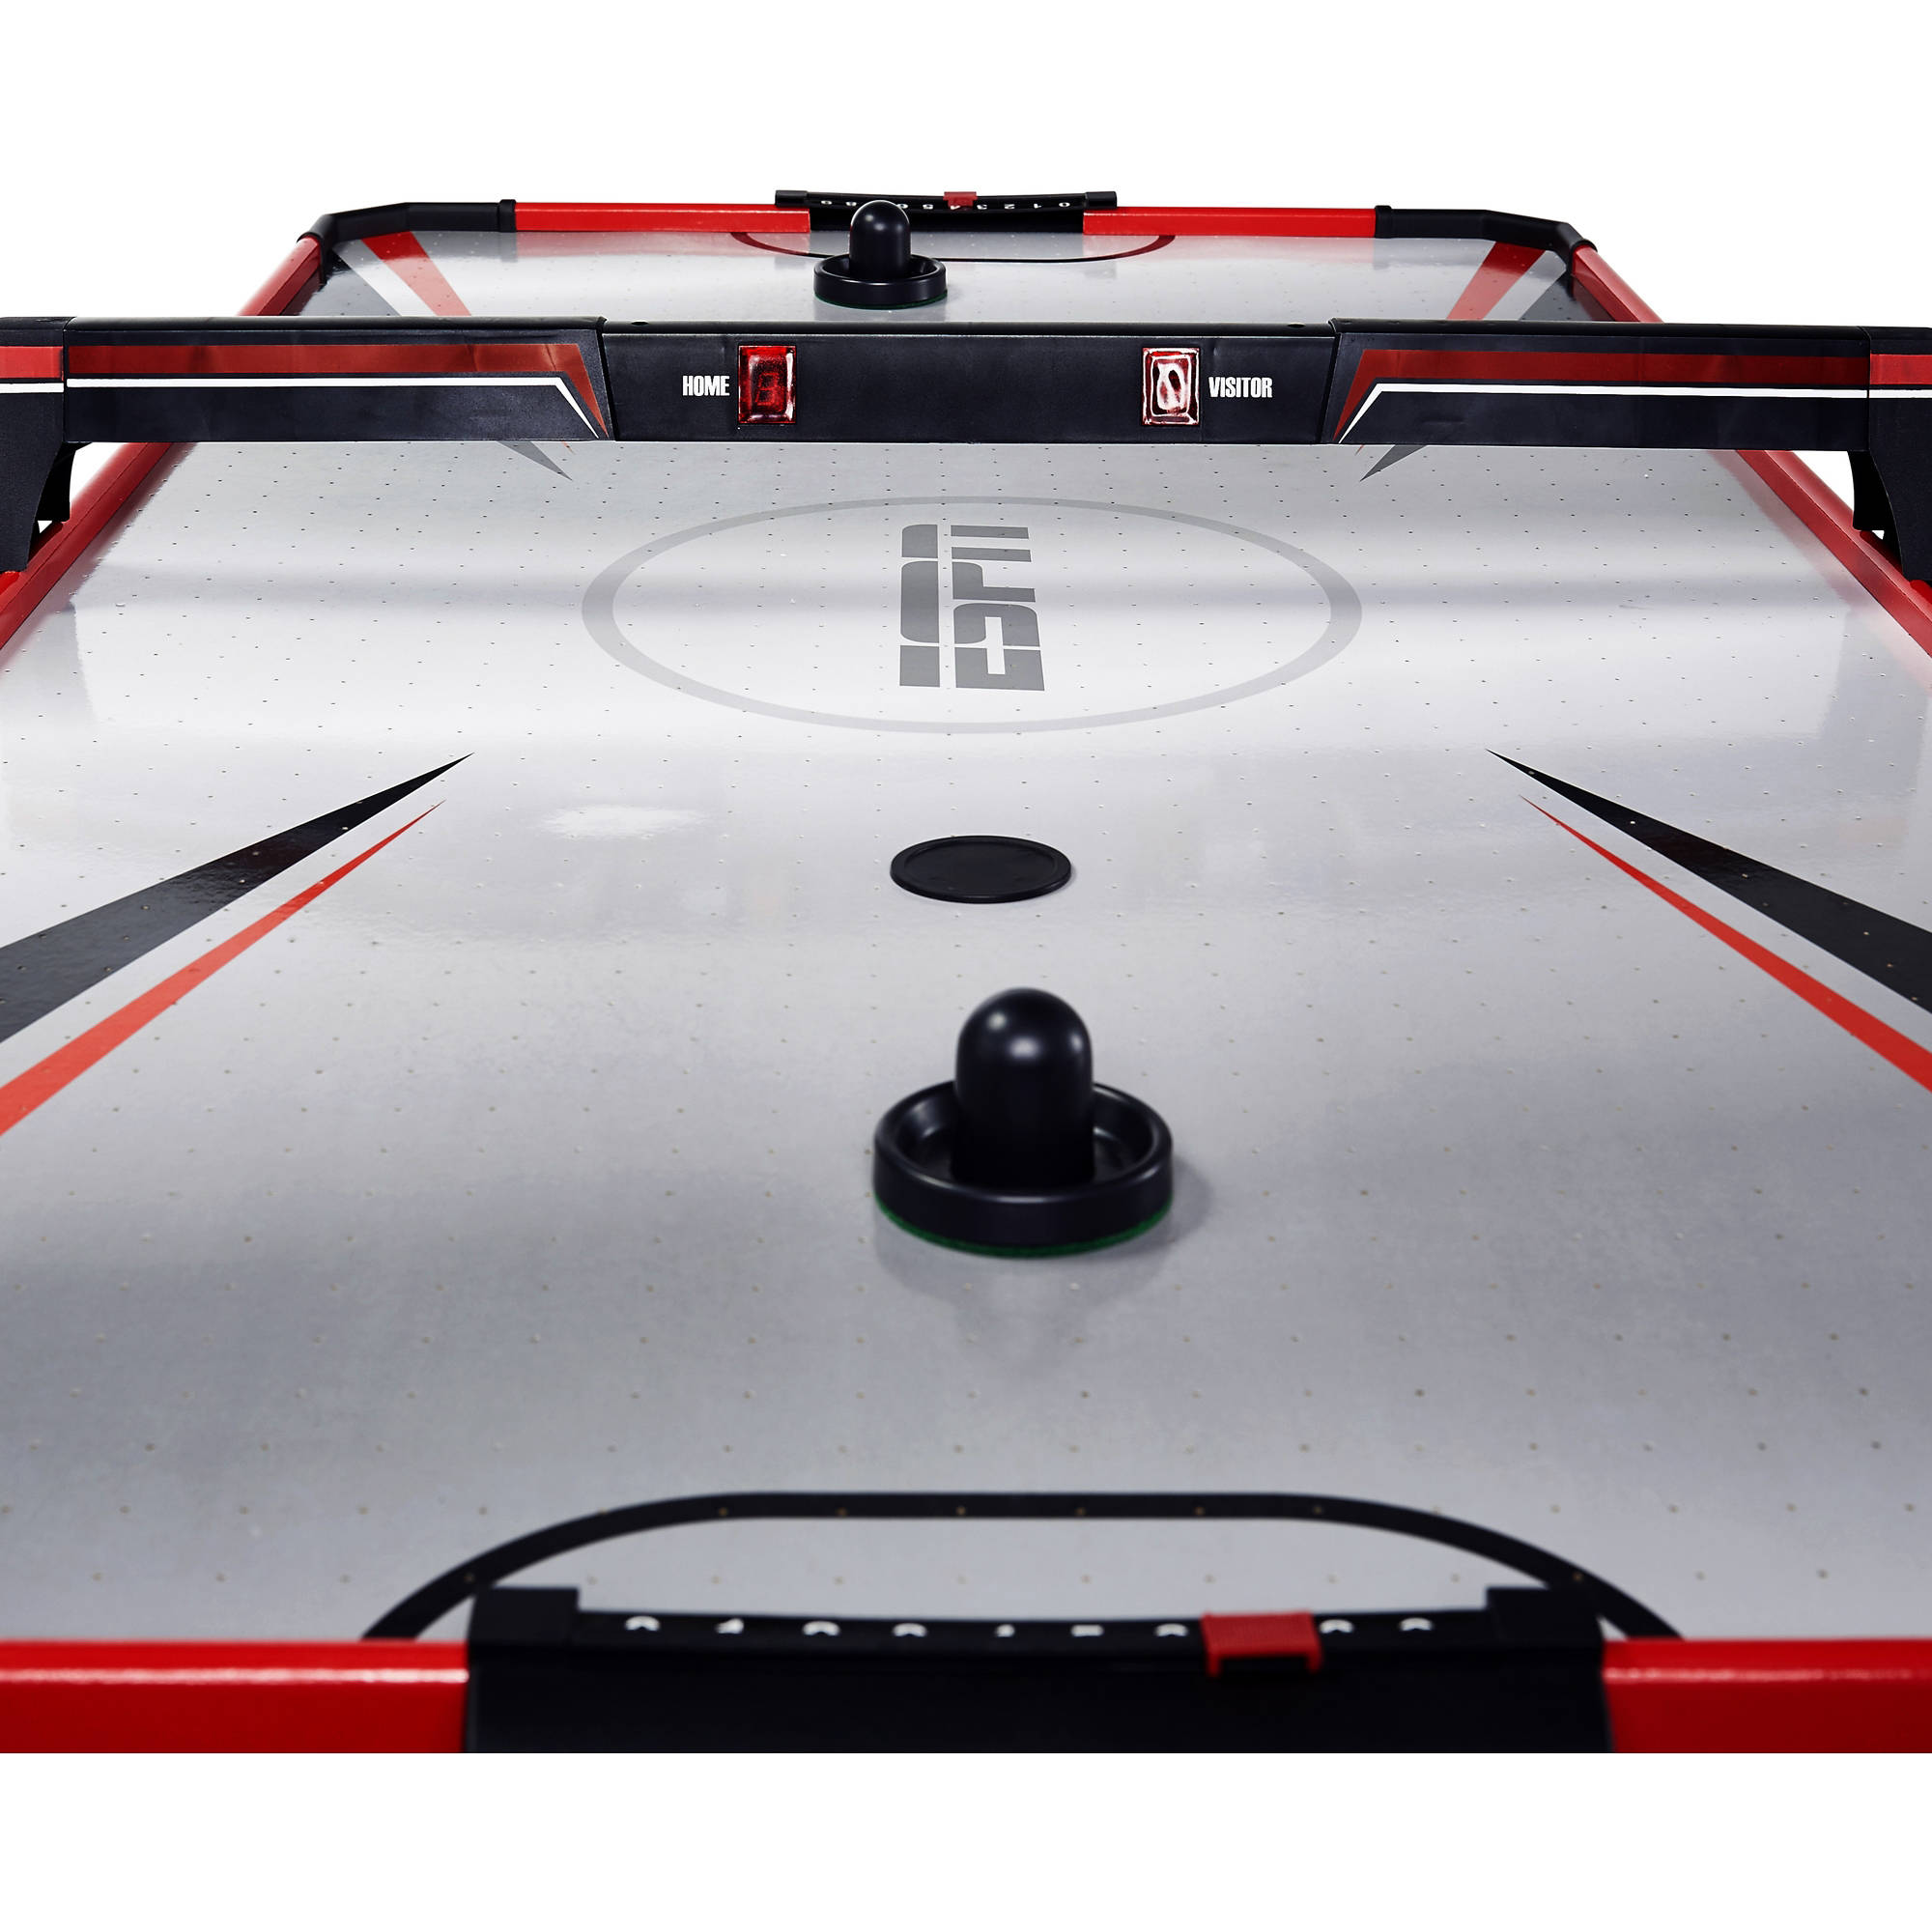 ESPN 60" Air Powered Hockey Table with Overhead Electronic Scorer, Accessories Included, Black/Red - image 5 of 8